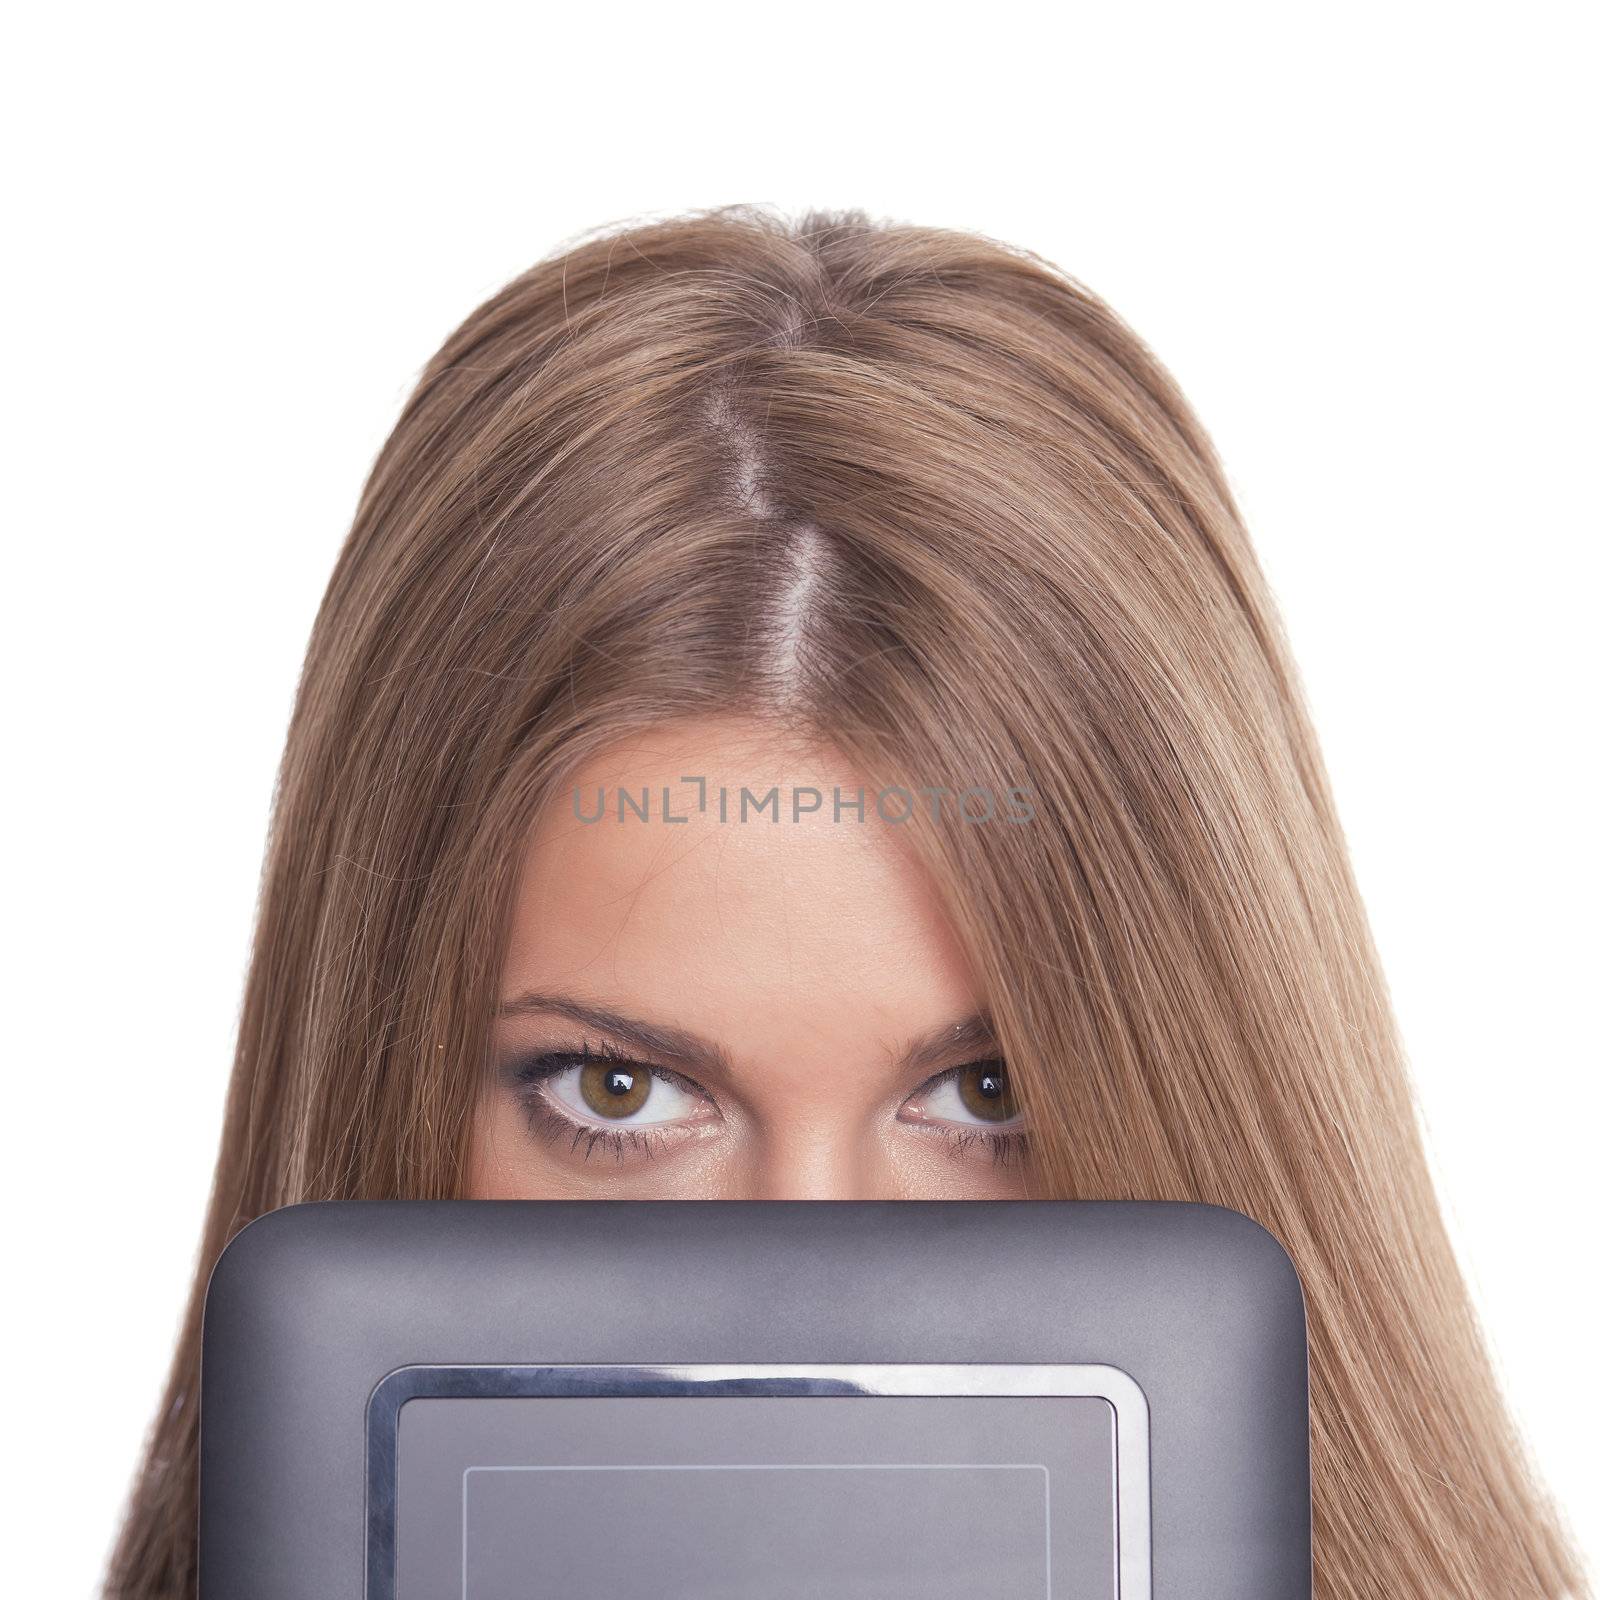 Beautiful Woman Hiding Face With Tablet Computer